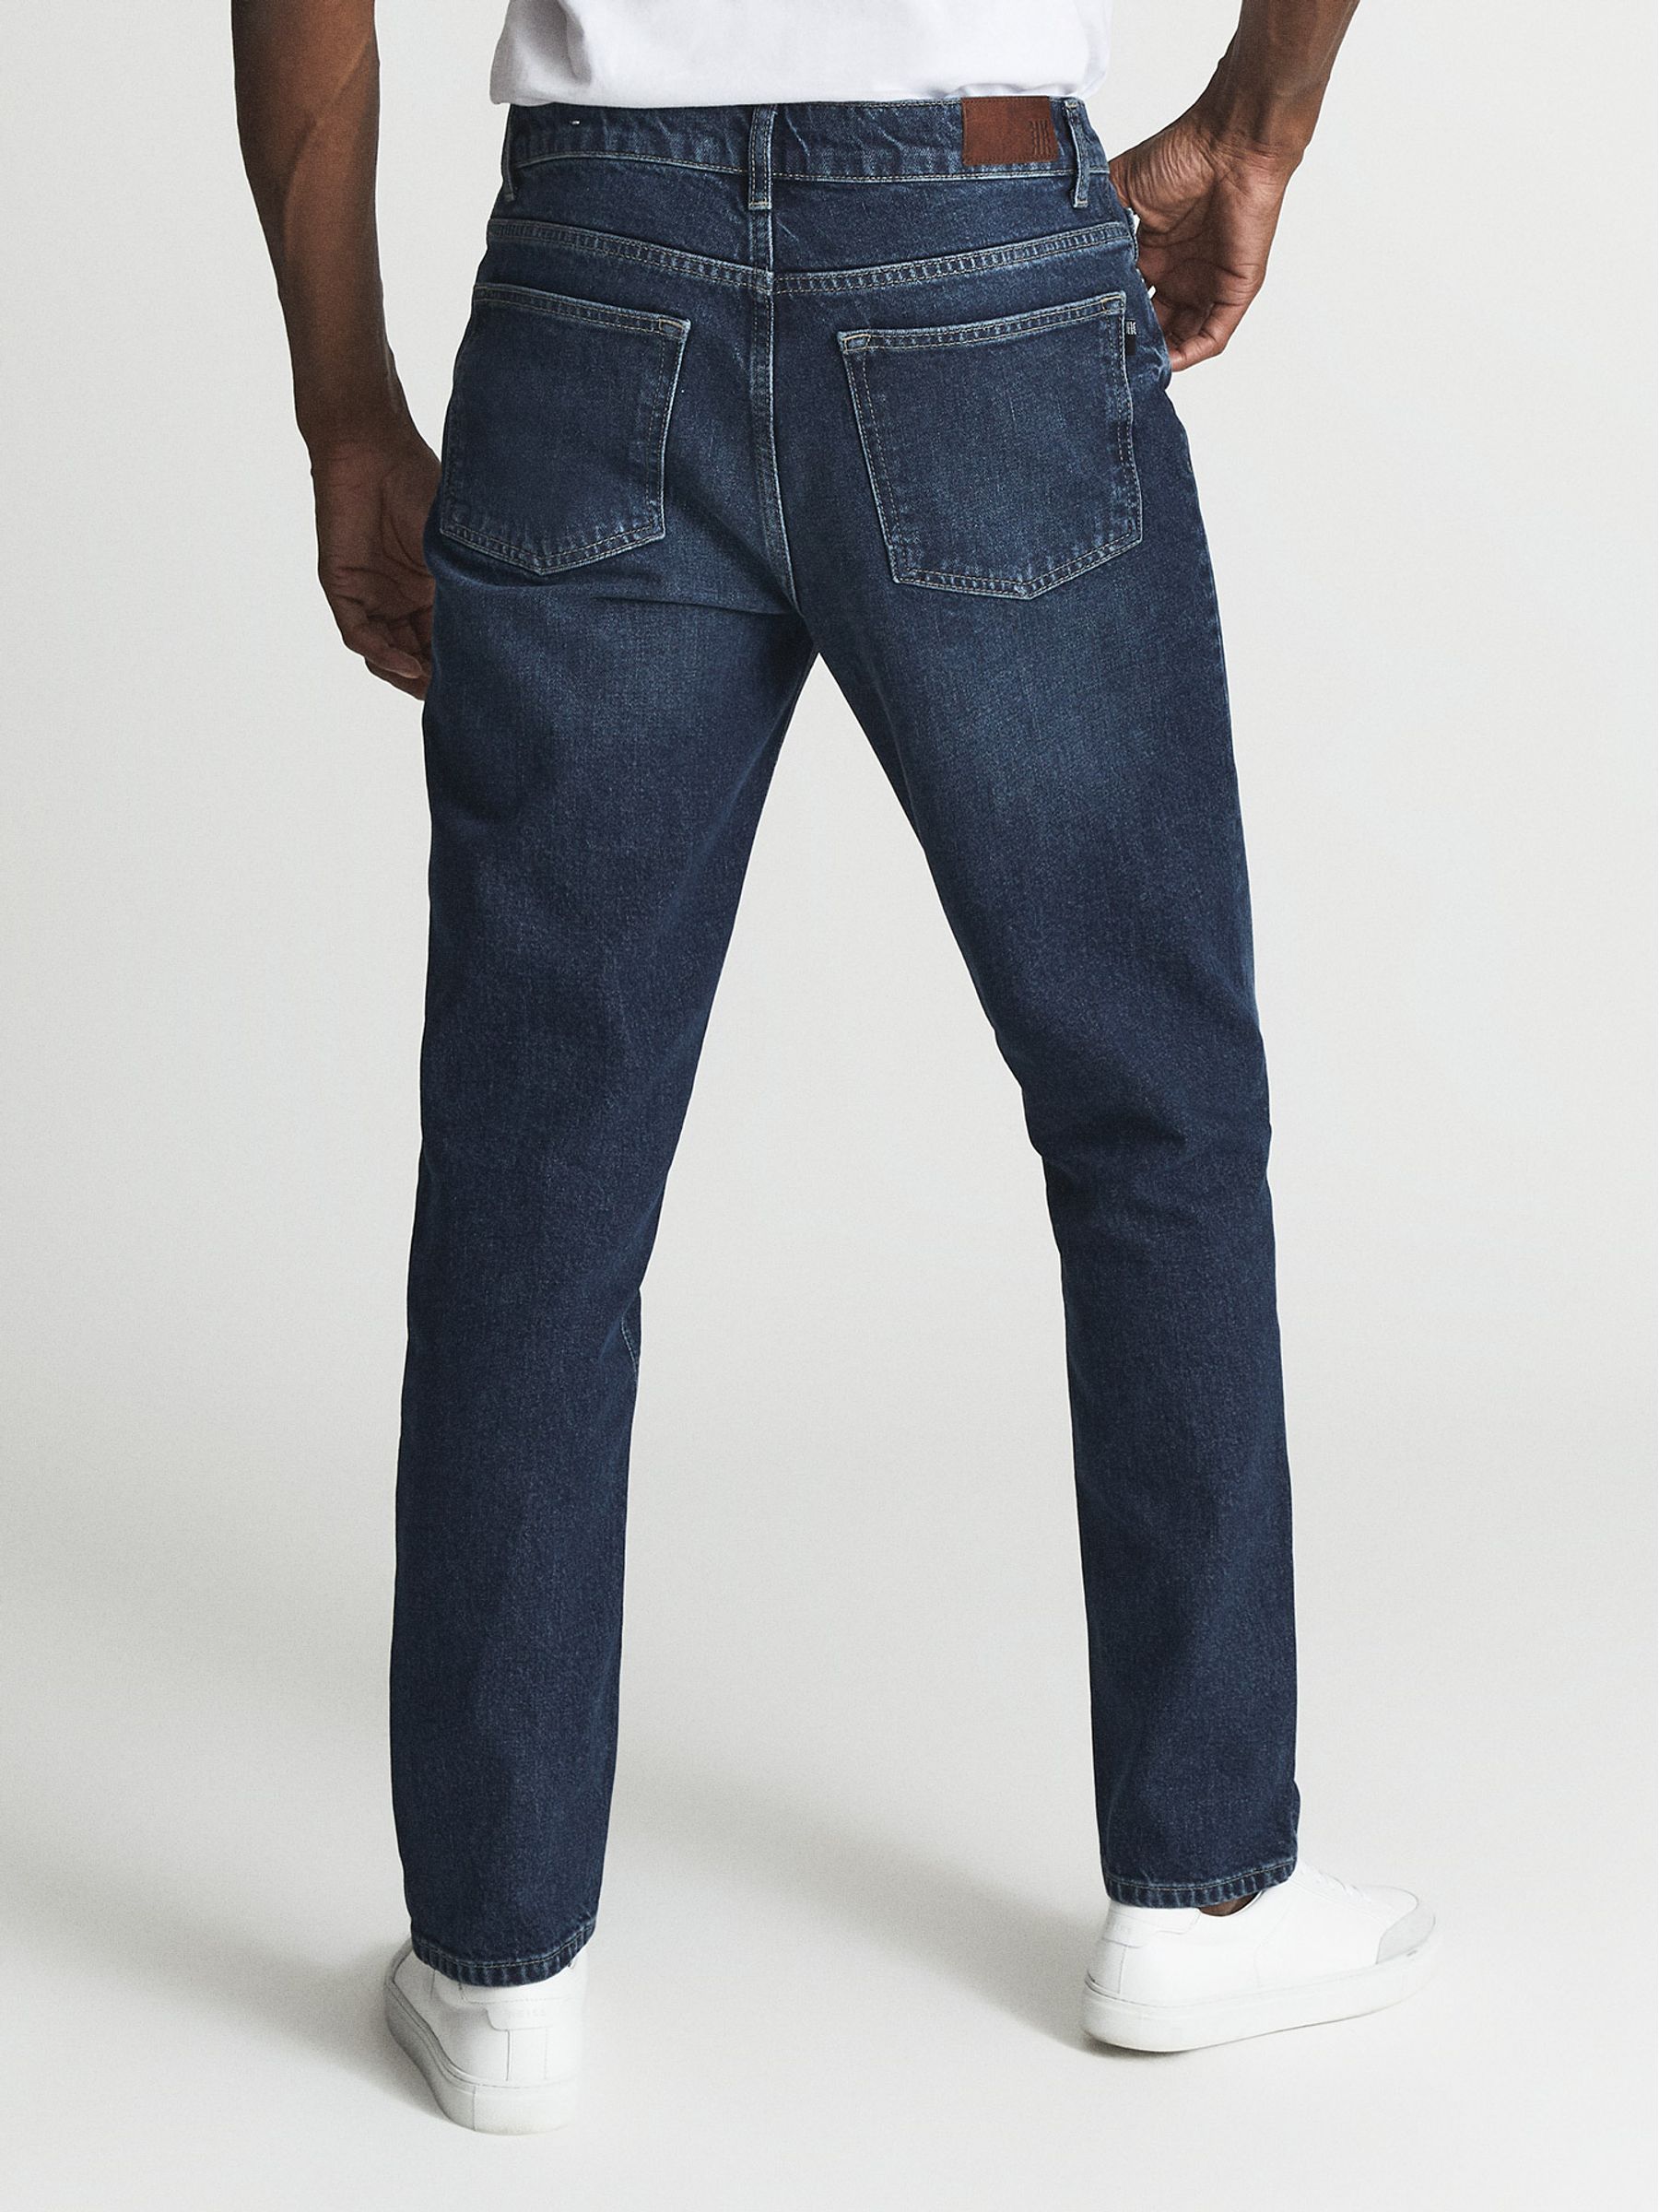 Reiss Walsh Slim Fit Washed Jeans - REISS